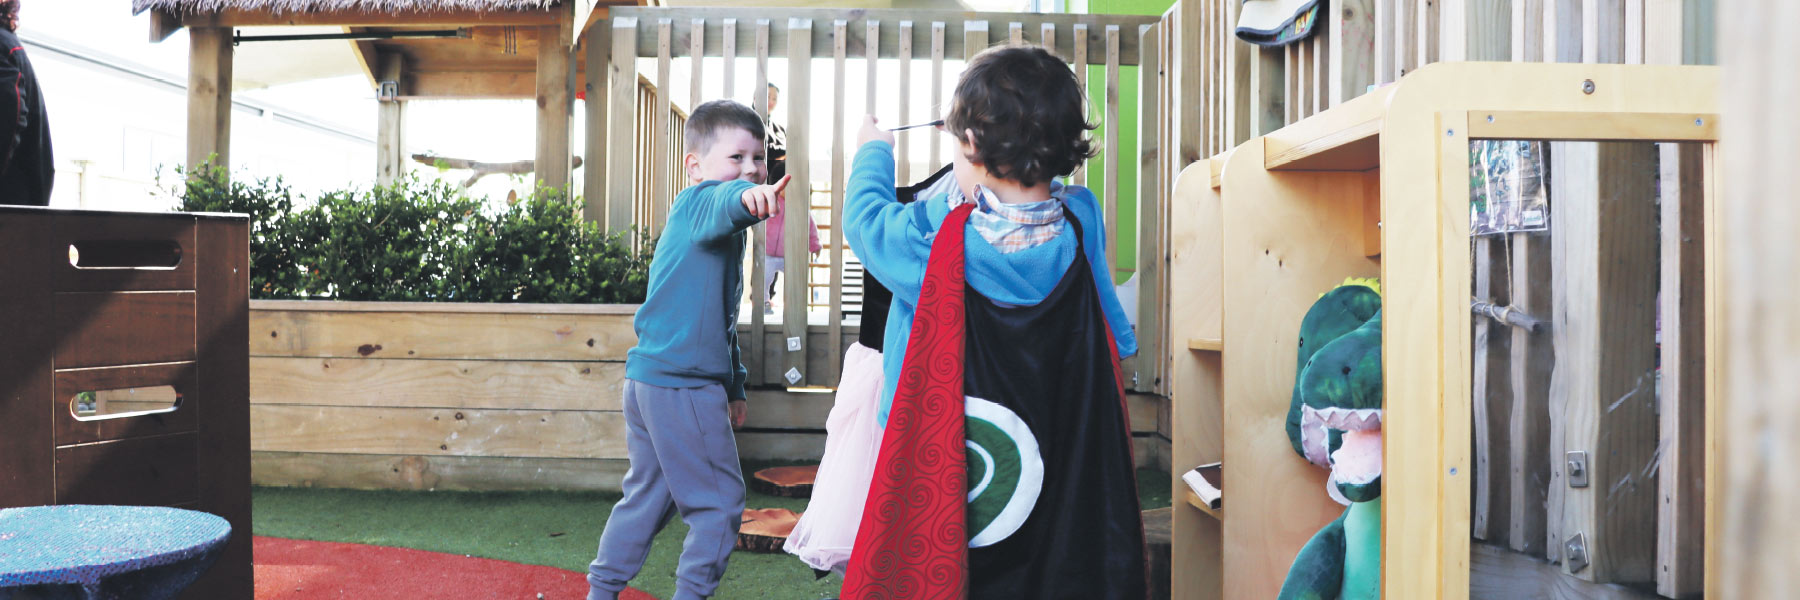 Mangere Early Learning Centre